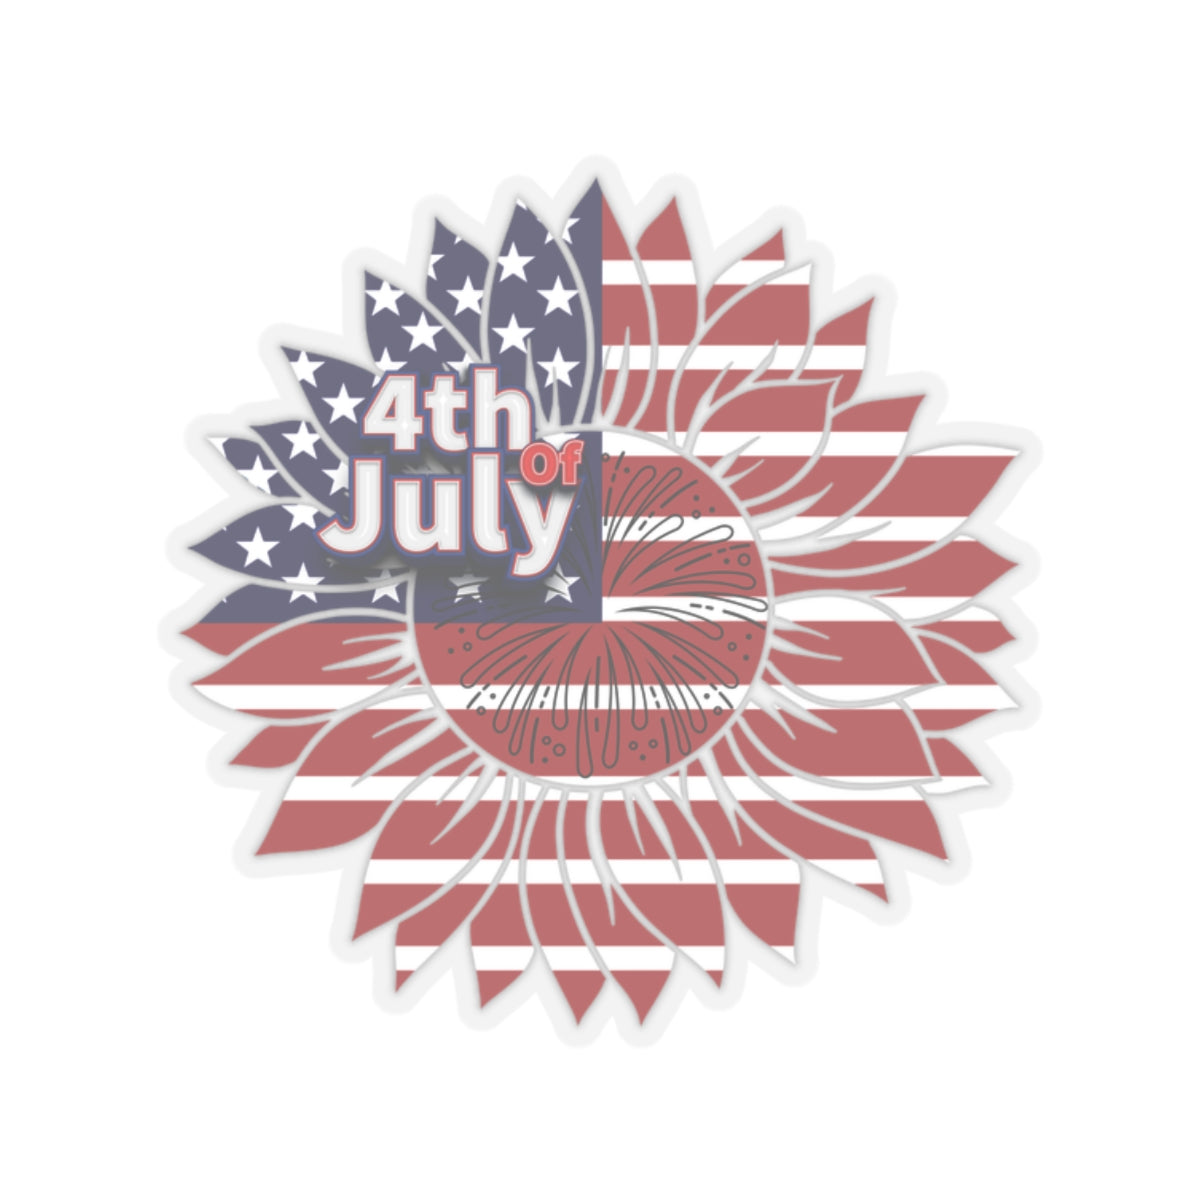 Happy 4th Of July Kiss-Cut Stickers, America, Flag, Peace Love America. Proud To Be An American, Red White Blue stickers. God  Bless America Stickers.